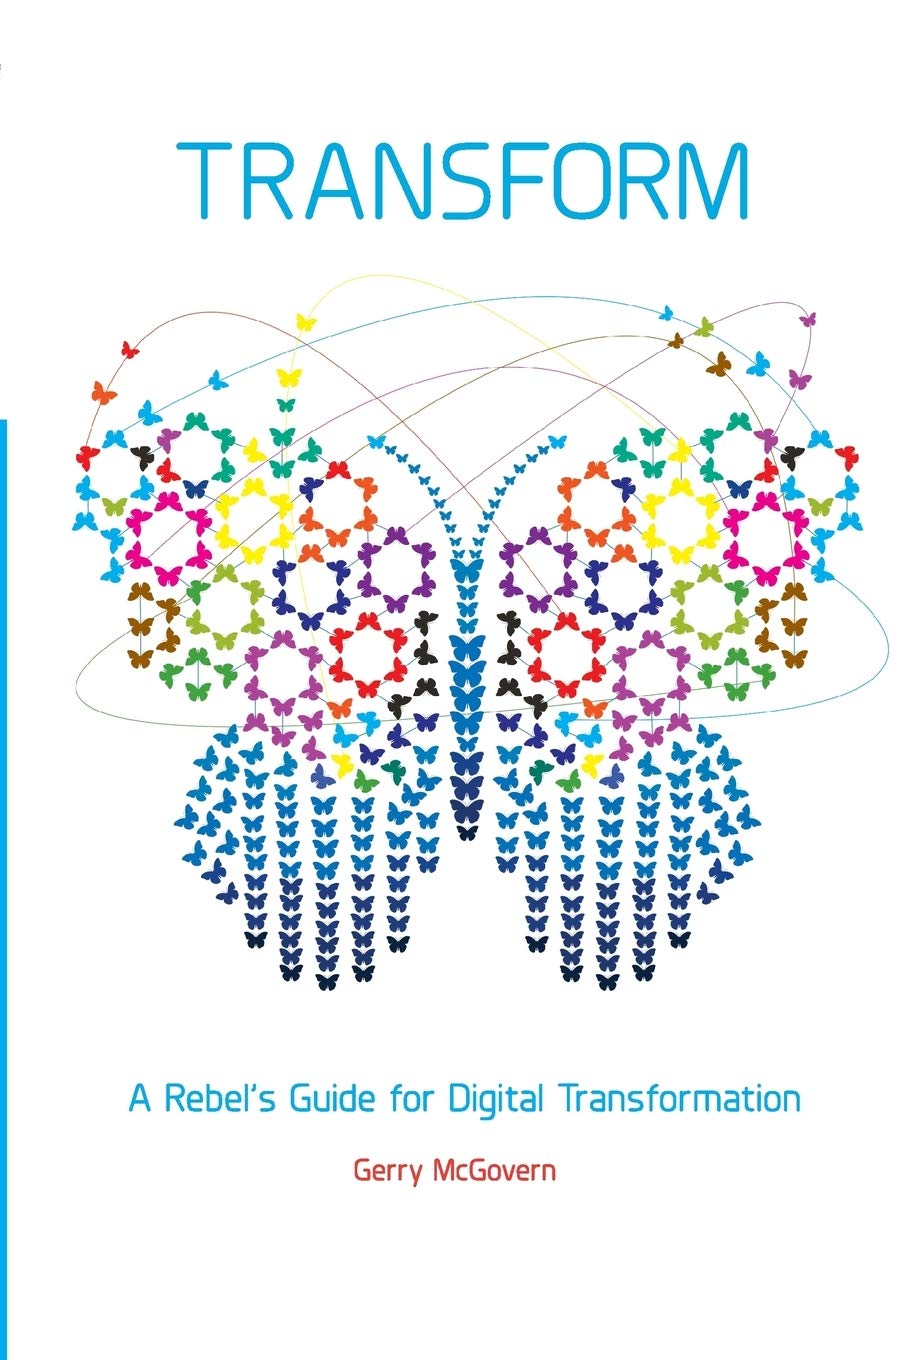 Transform: A rebel's guide for digital transformation by Gerry McGovern